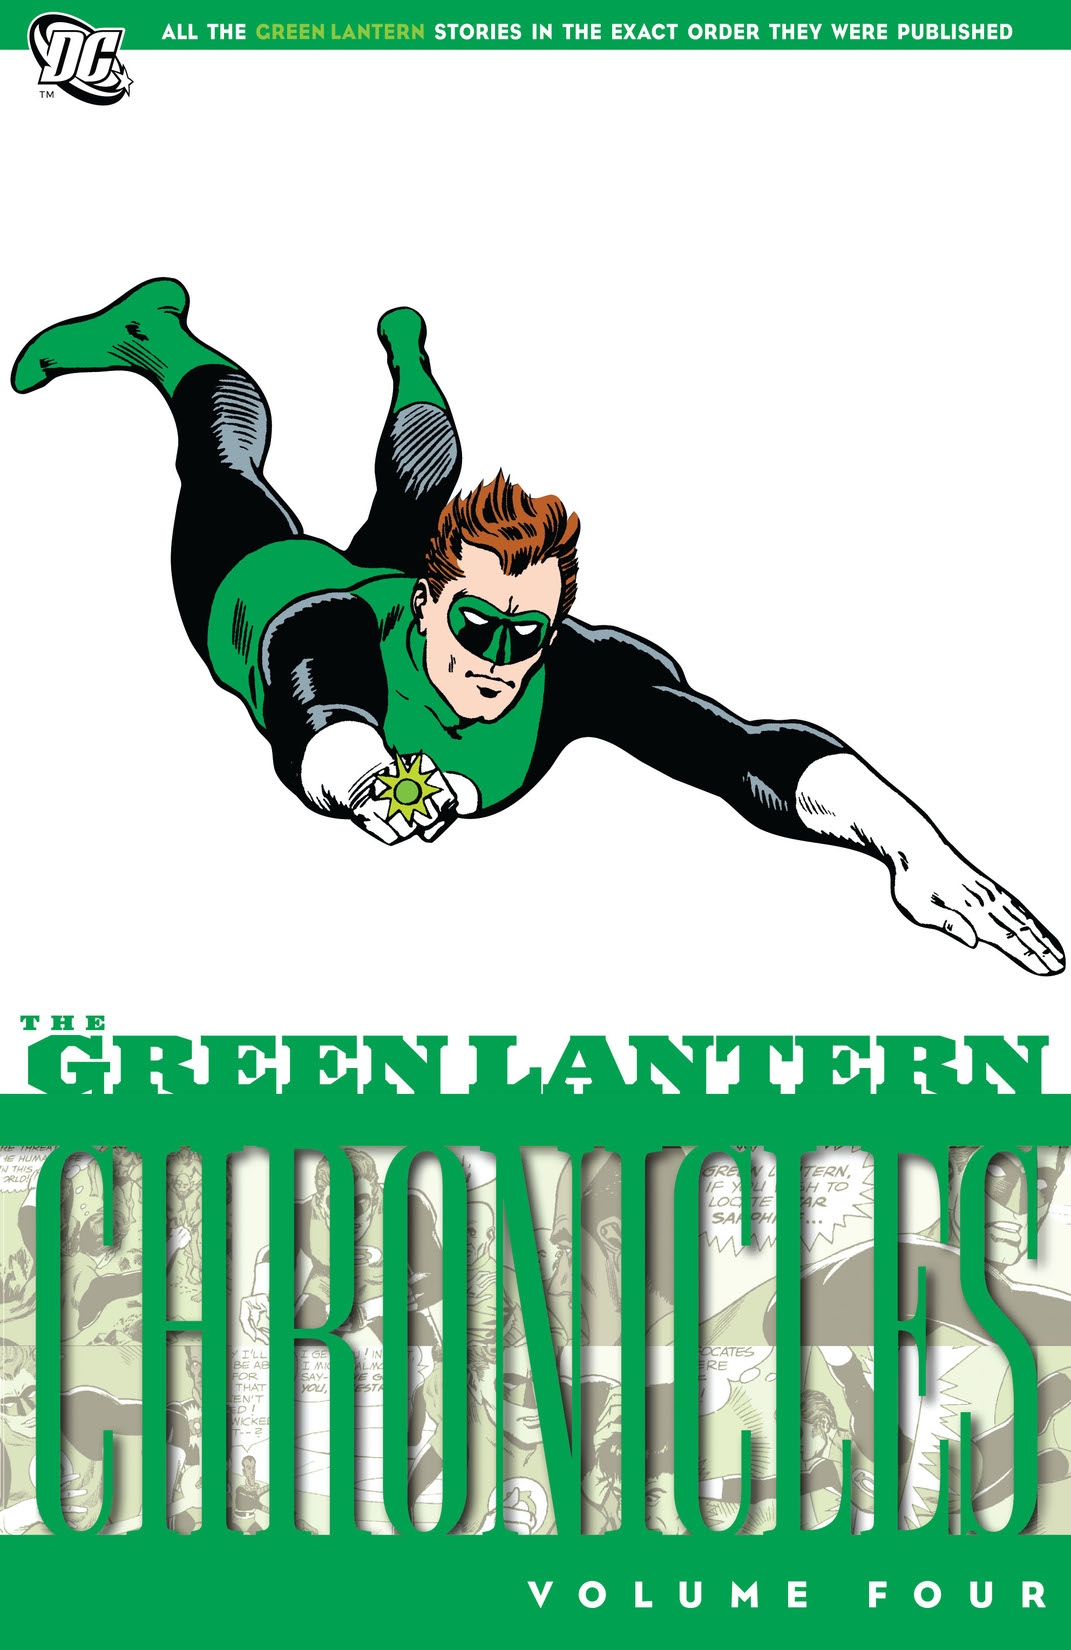 The Green Lantern Chronicles Vol. 4 preview images